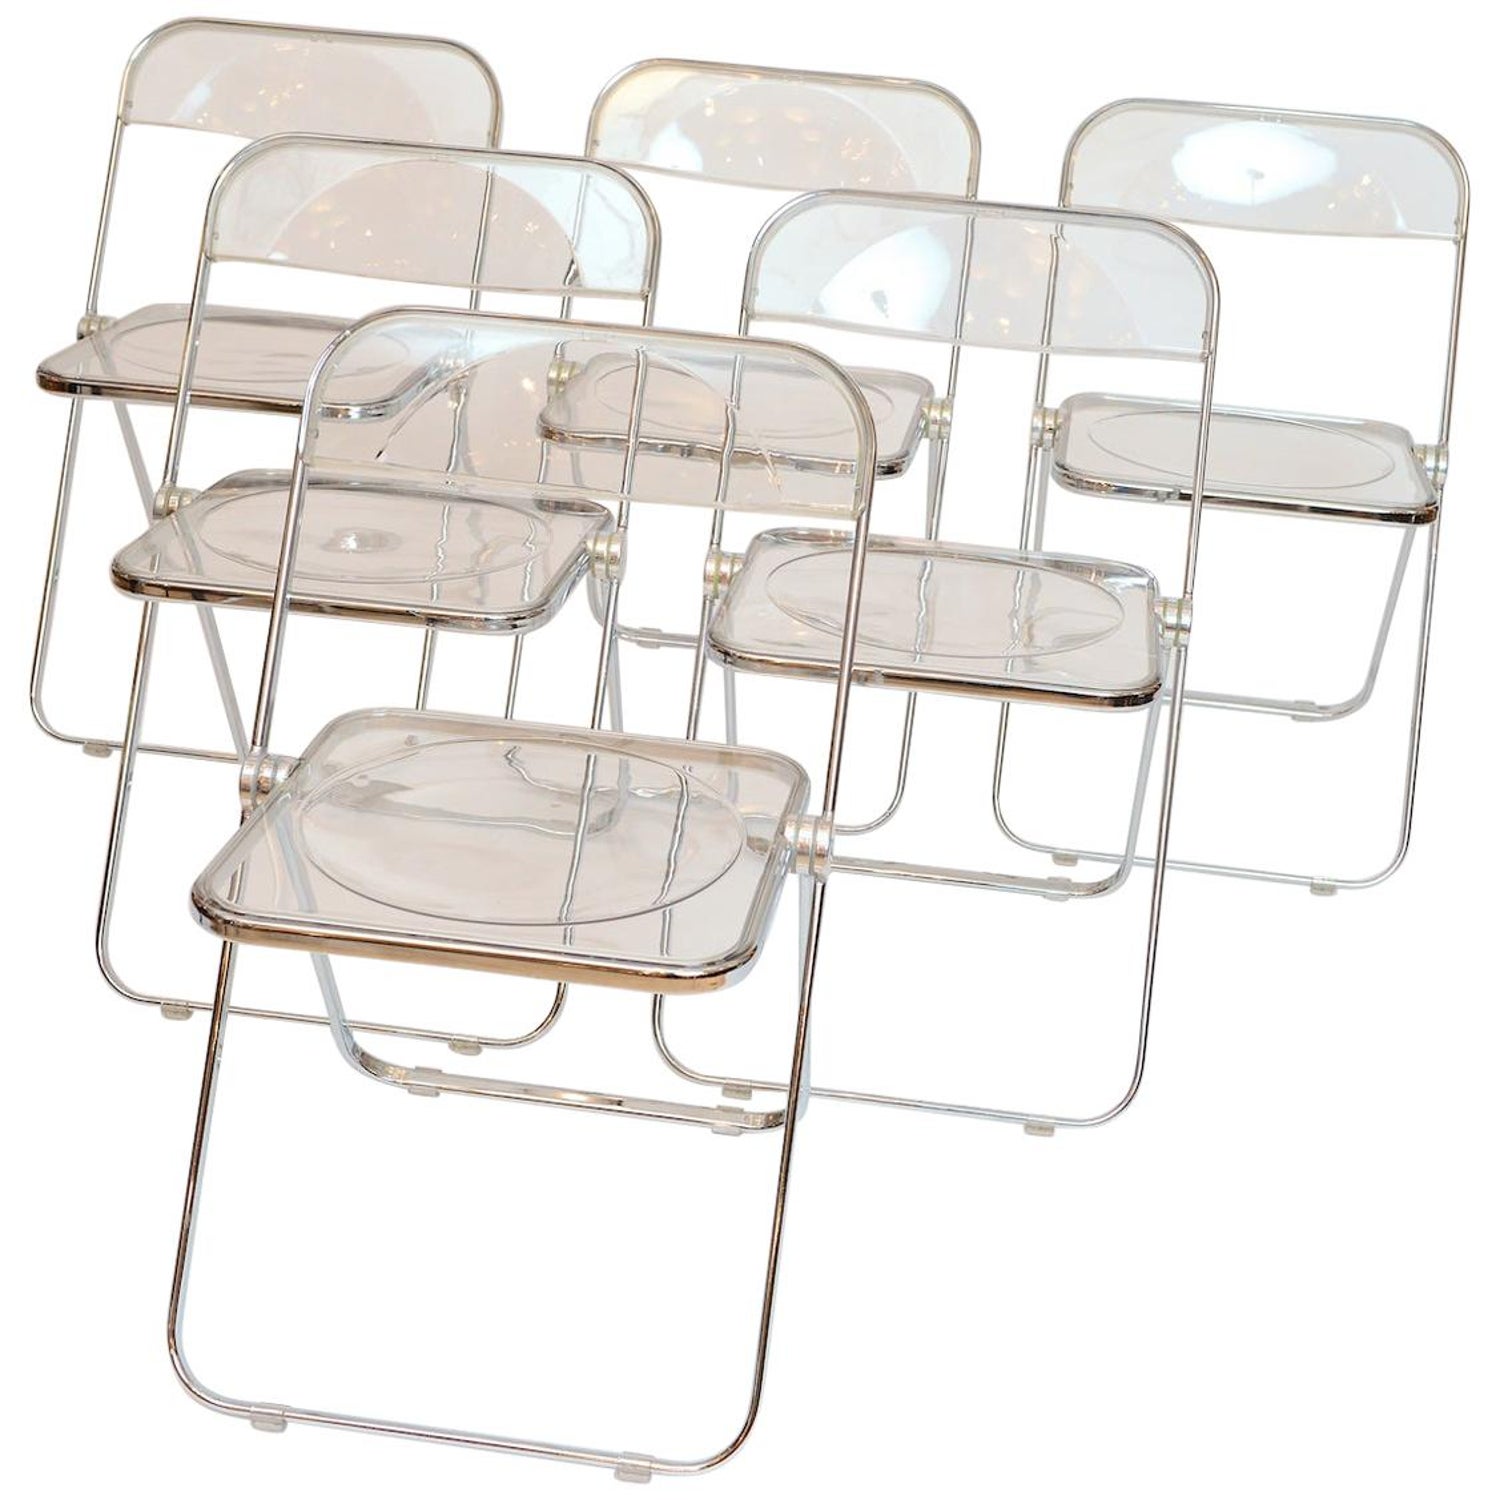 Plia Folding Lucite And Chrome Chairs 1967 For Sale At 1stdibs